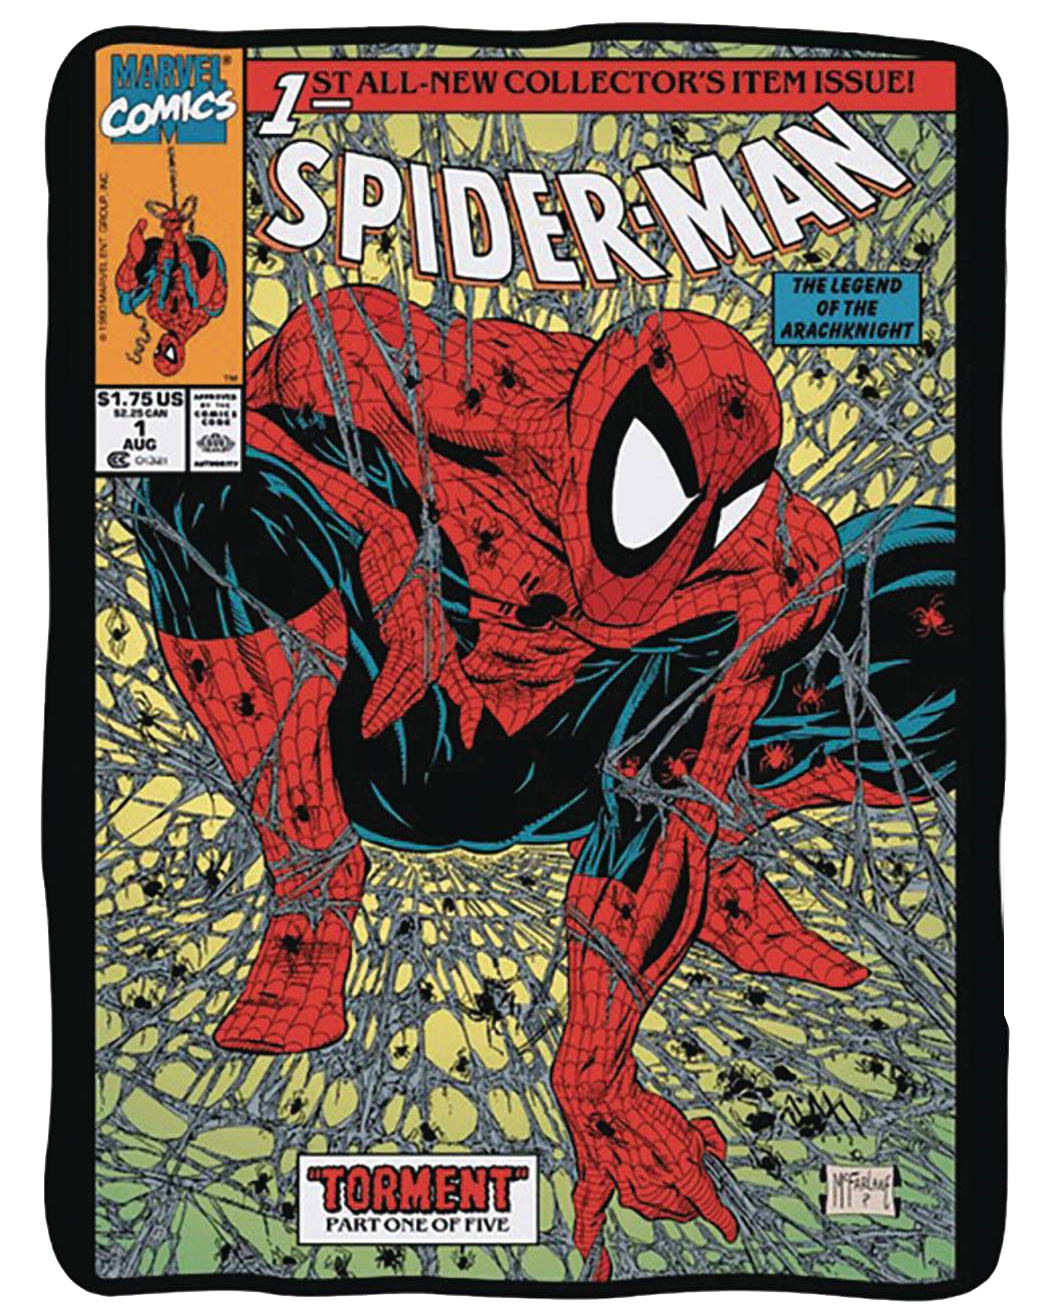 Spider-Man Comics Throw Blanket with Covers by Todd McFarlane (Spider-Man #1 1990)